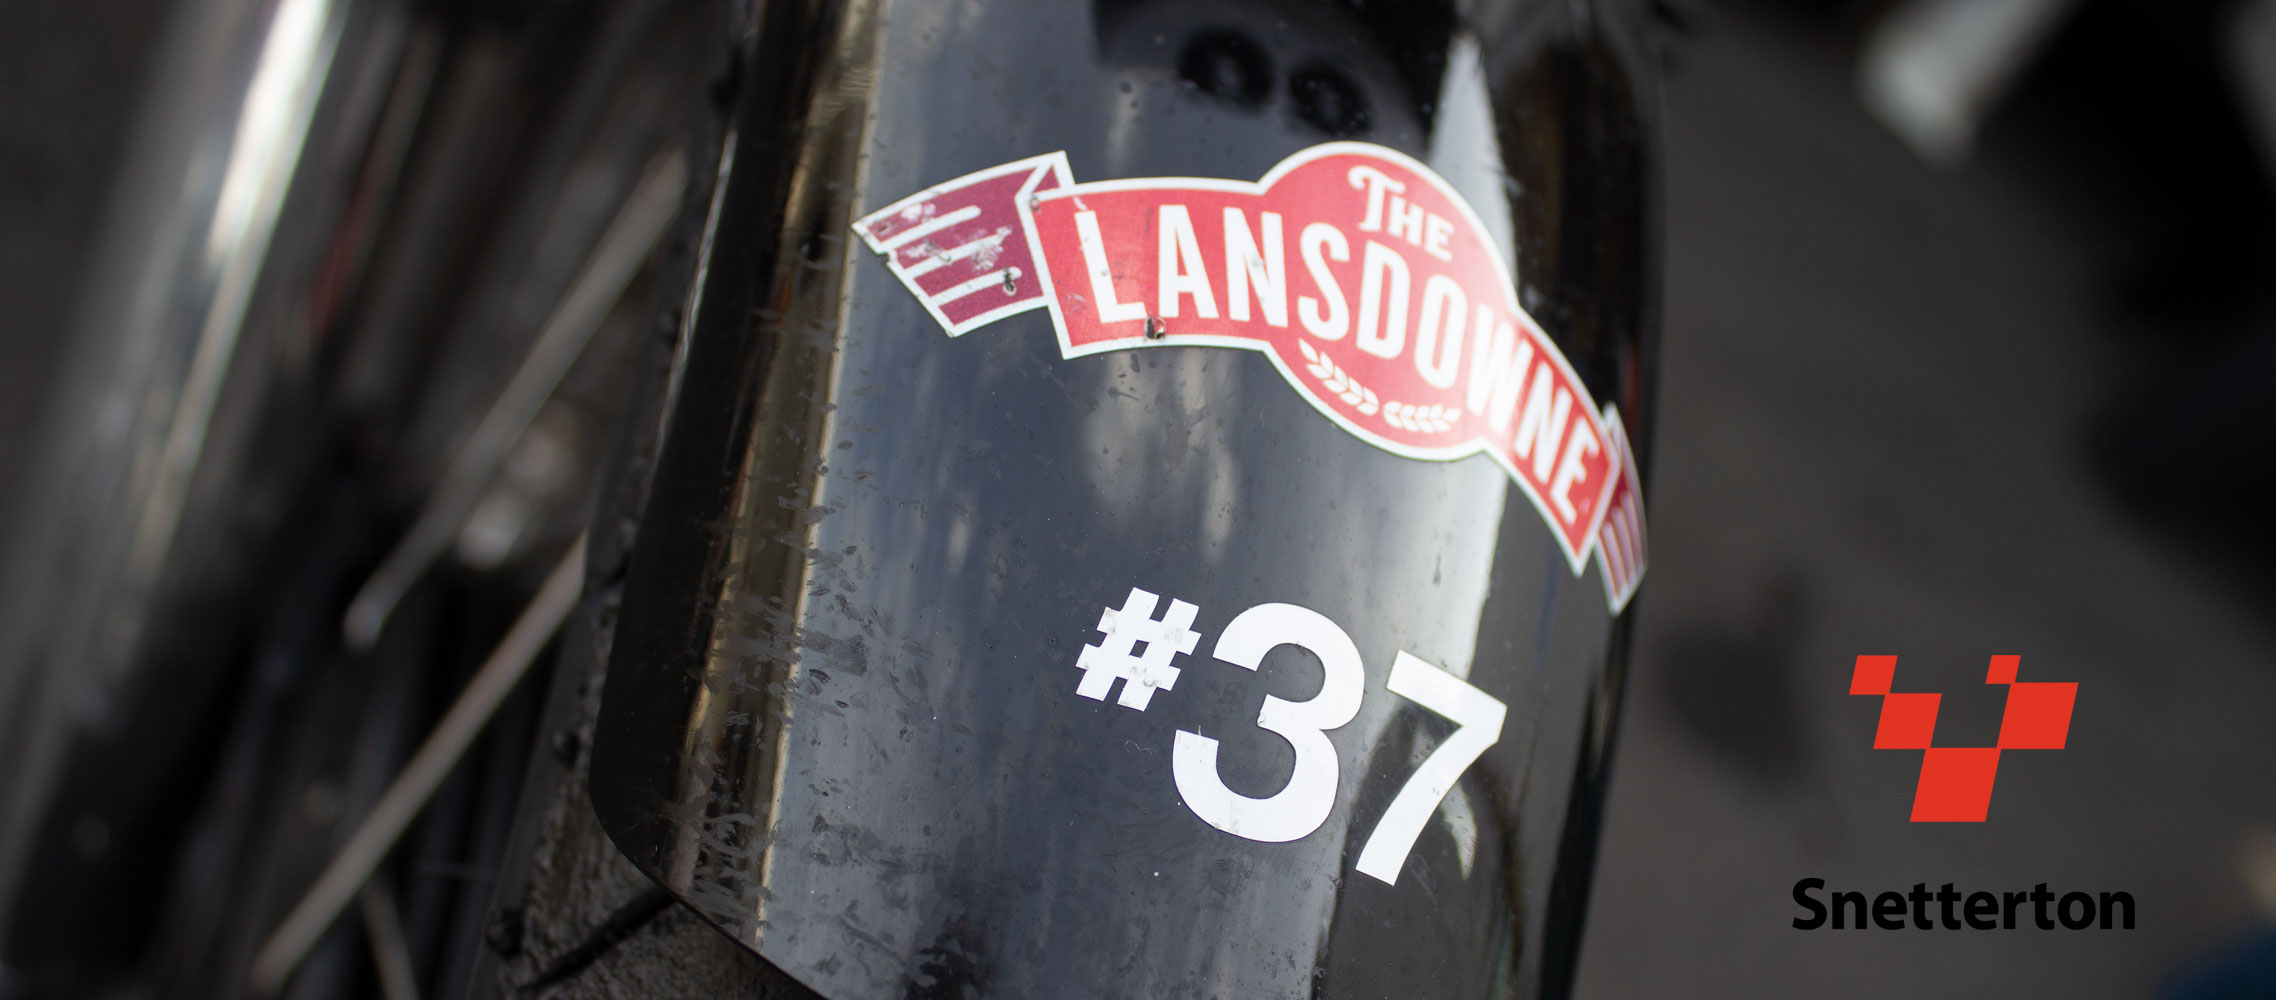 The Lansdowne celebrate the life and racing of Clive Ling